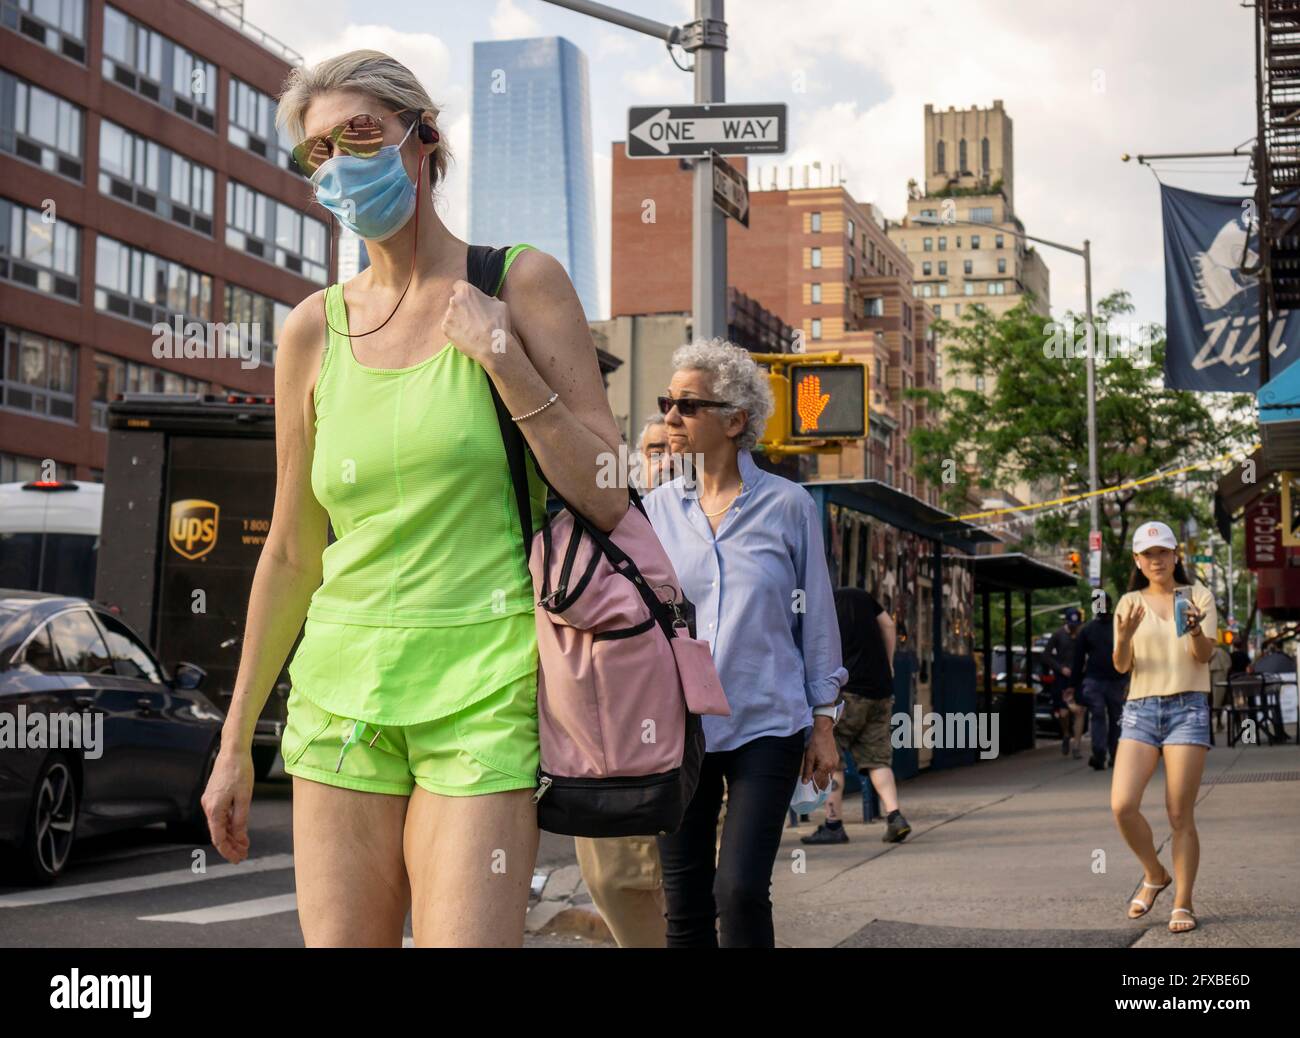 Masked and maskless people in Chelsea in New York on Tuesday, May 18, 2021. New York has relaxed mask mandates allowing most outdoor activities to be mask free as well as many indoor settings, with caveats. (© Richard B. Levine) Stock Photo